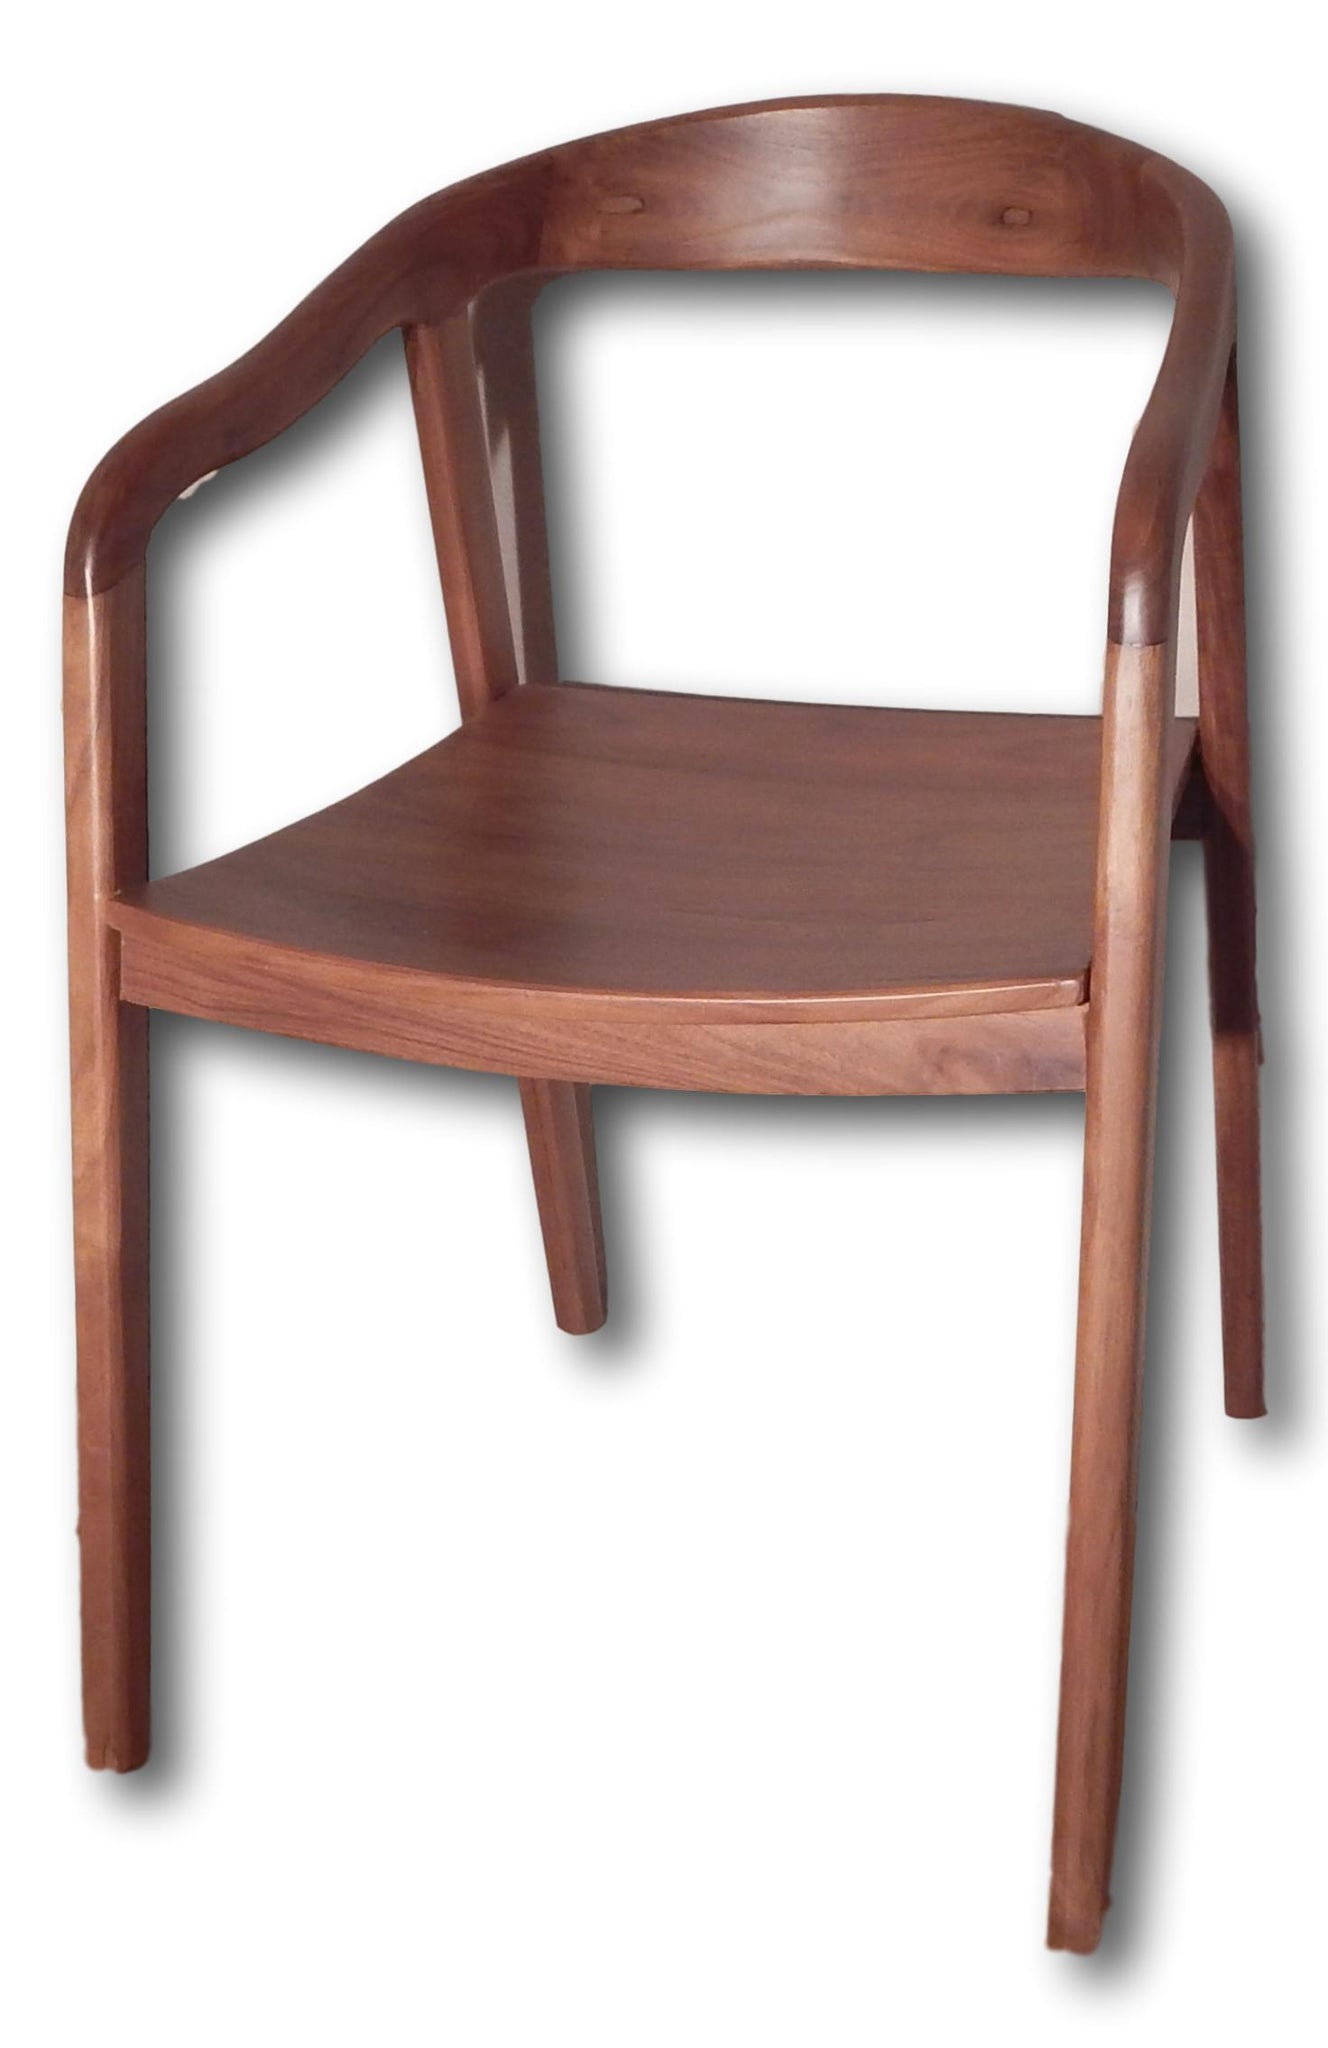 Teak Chairs Seattle Teak Furniture Roots Cabinets Tiles For